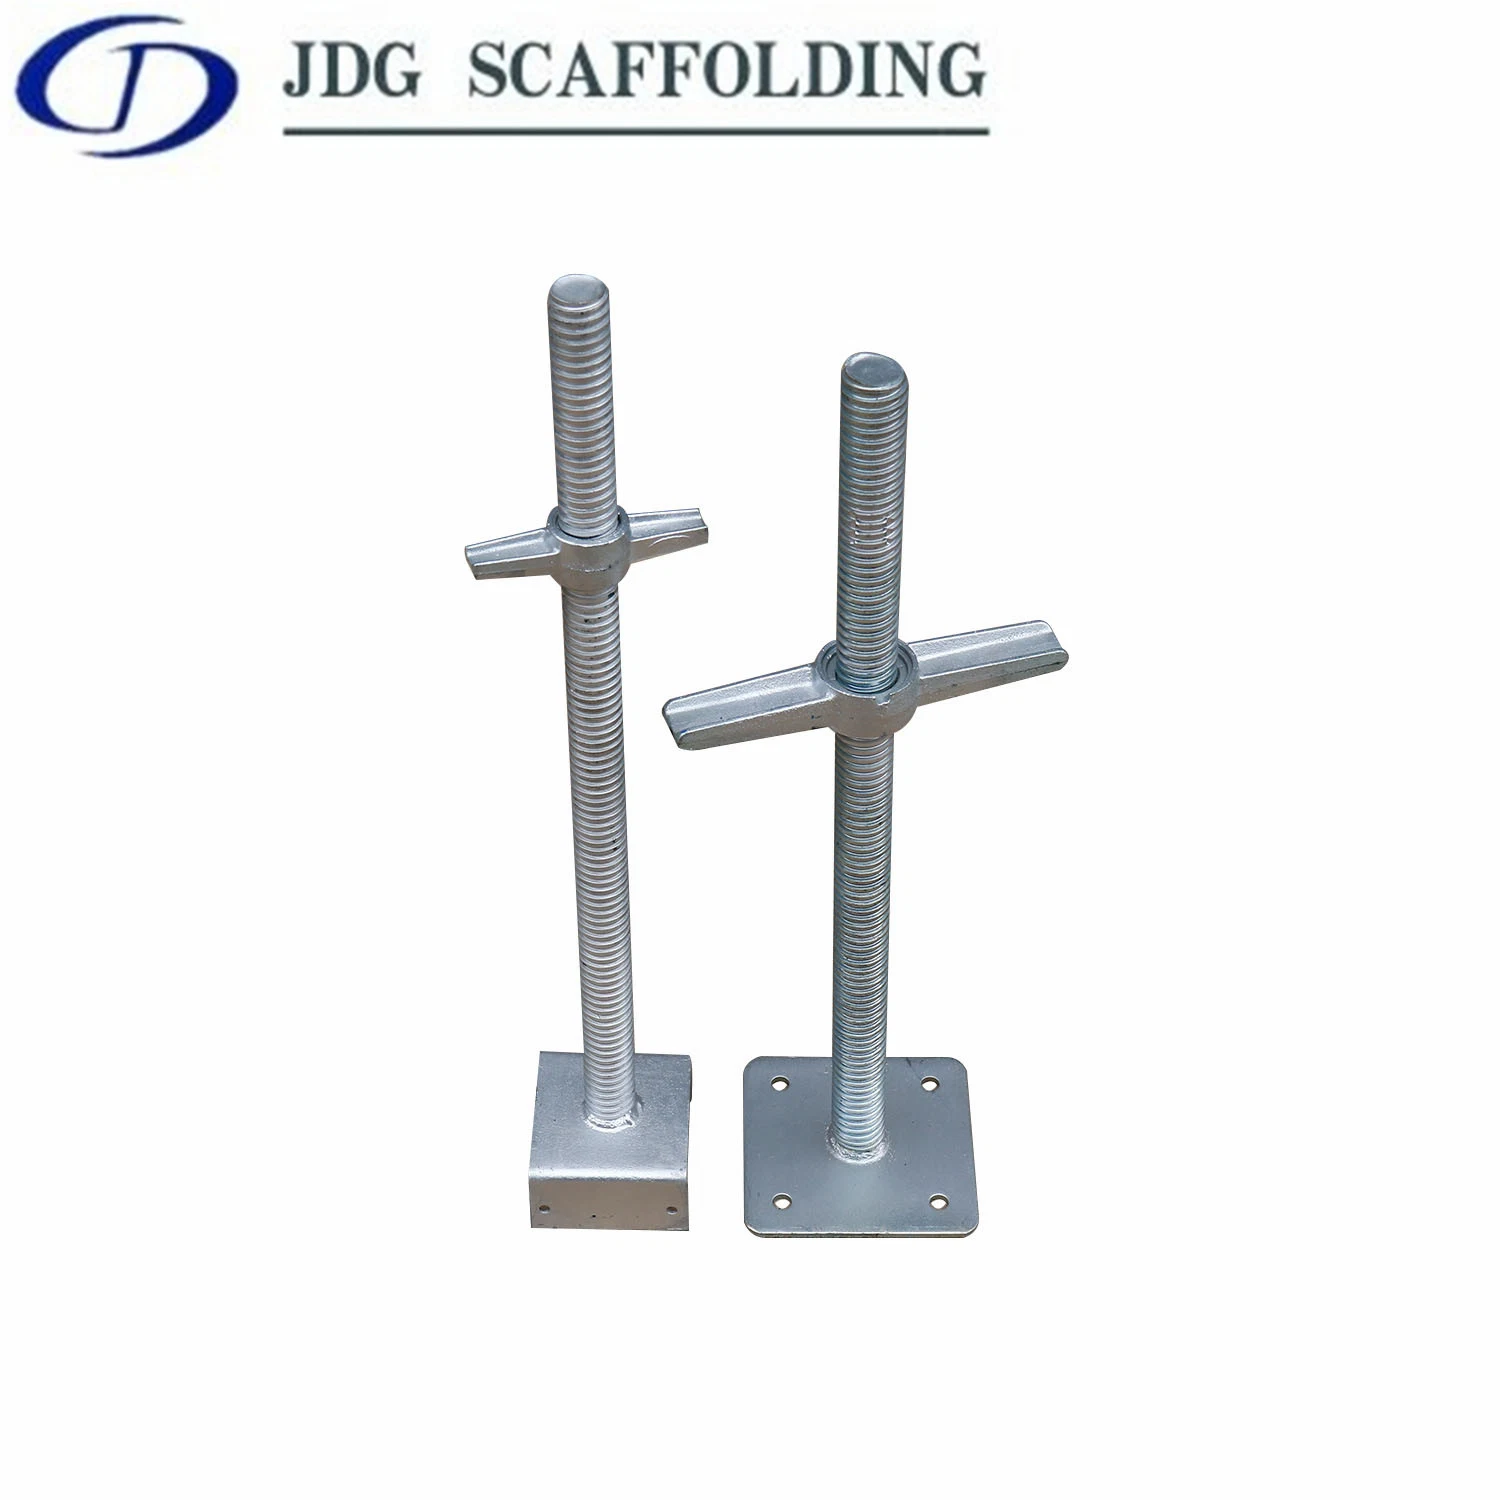 Scaffolding Accessories Part Solid Screw Base Jack and U Head for Construction